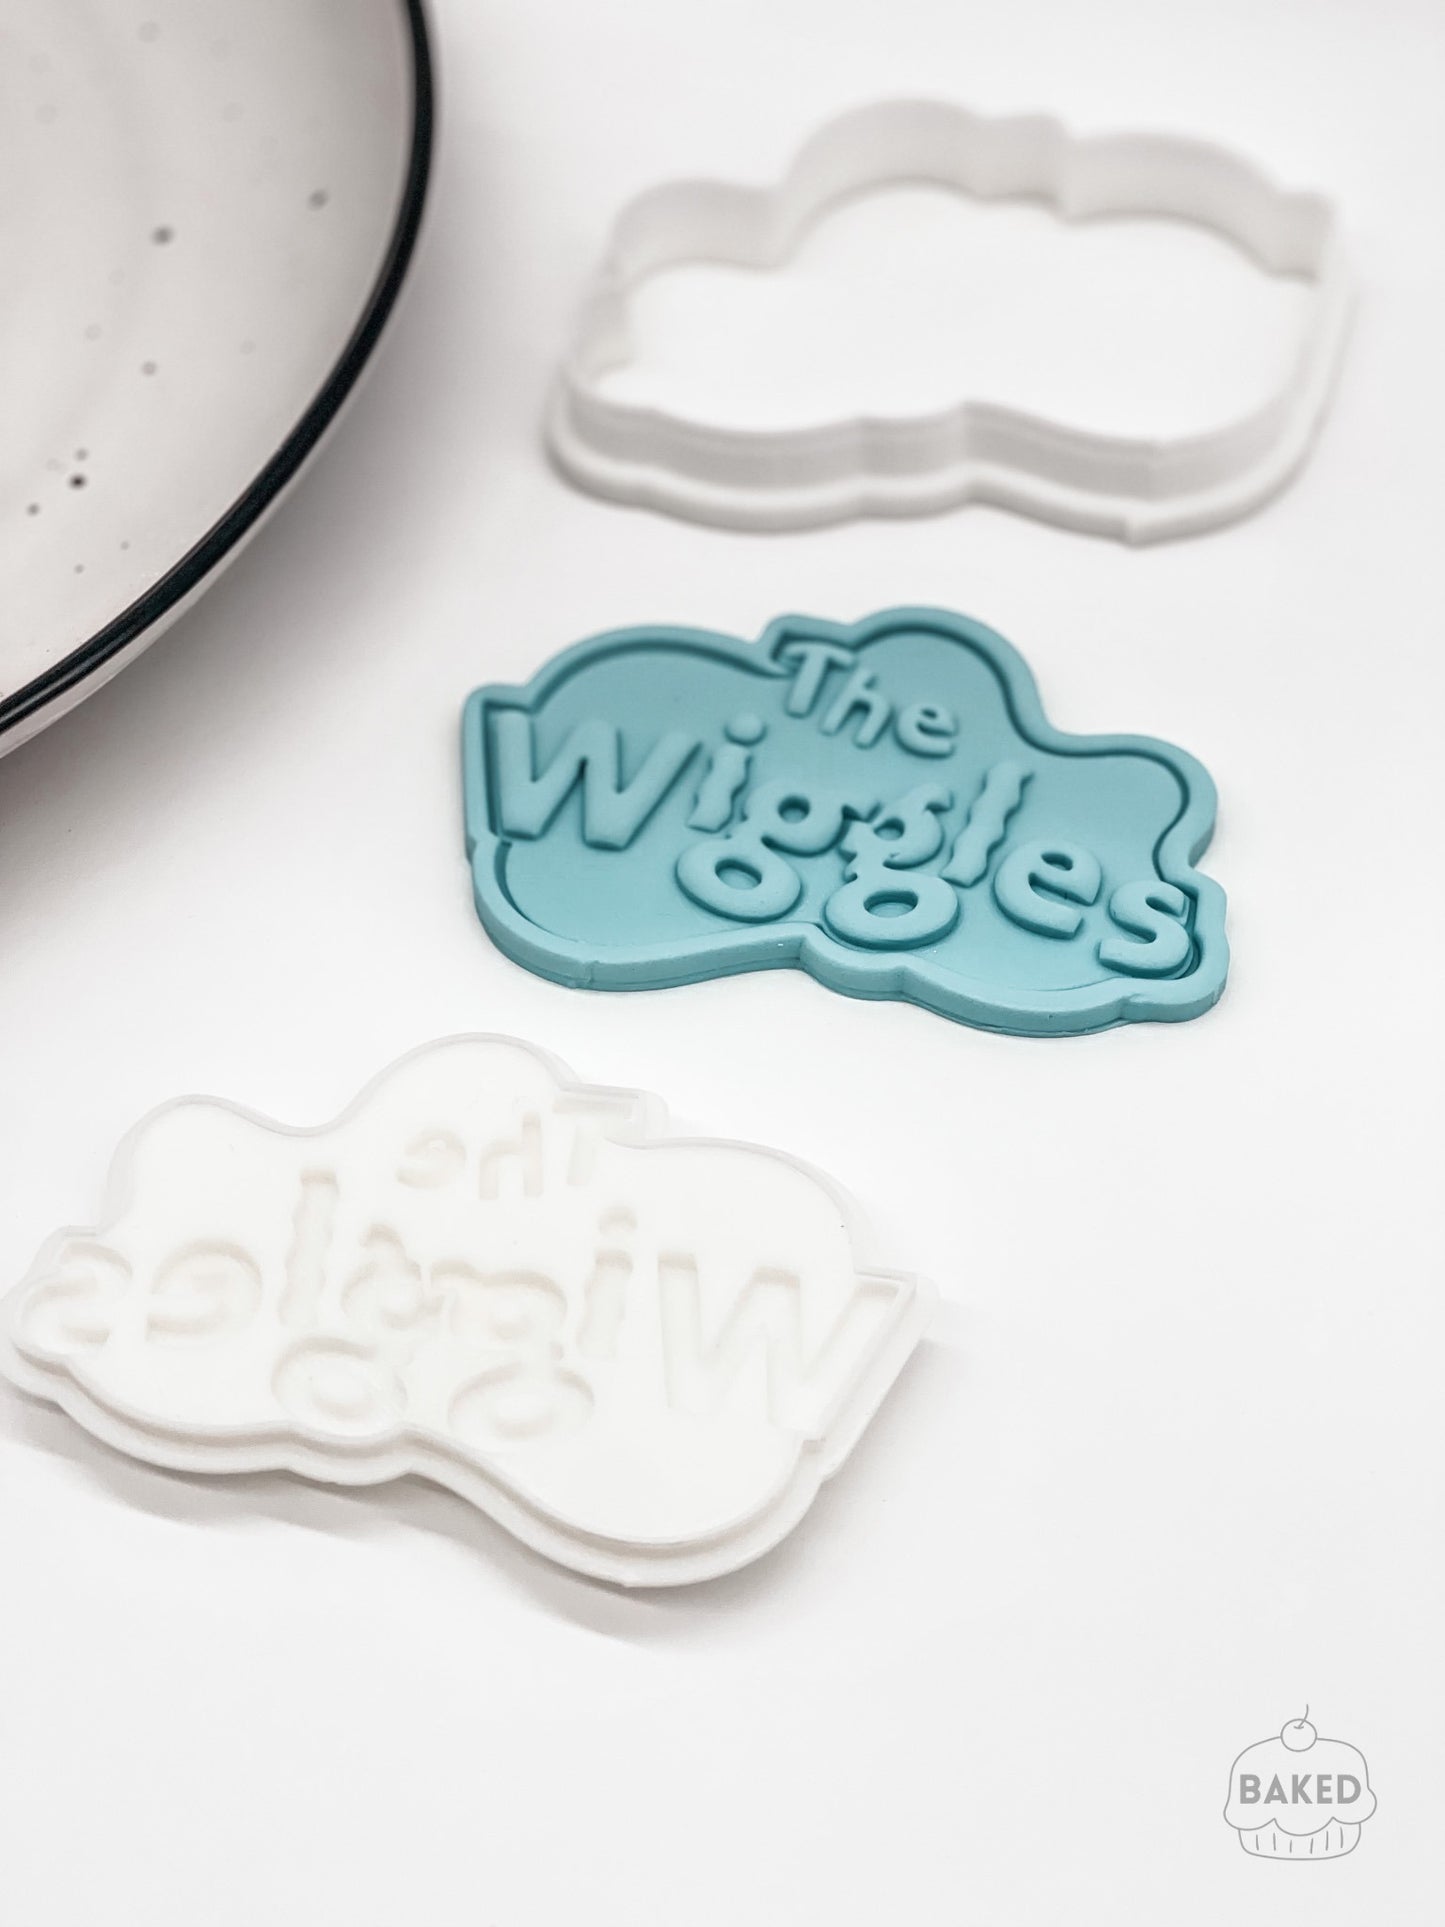 Wiggles Logo Cookie Stamp and Cutter